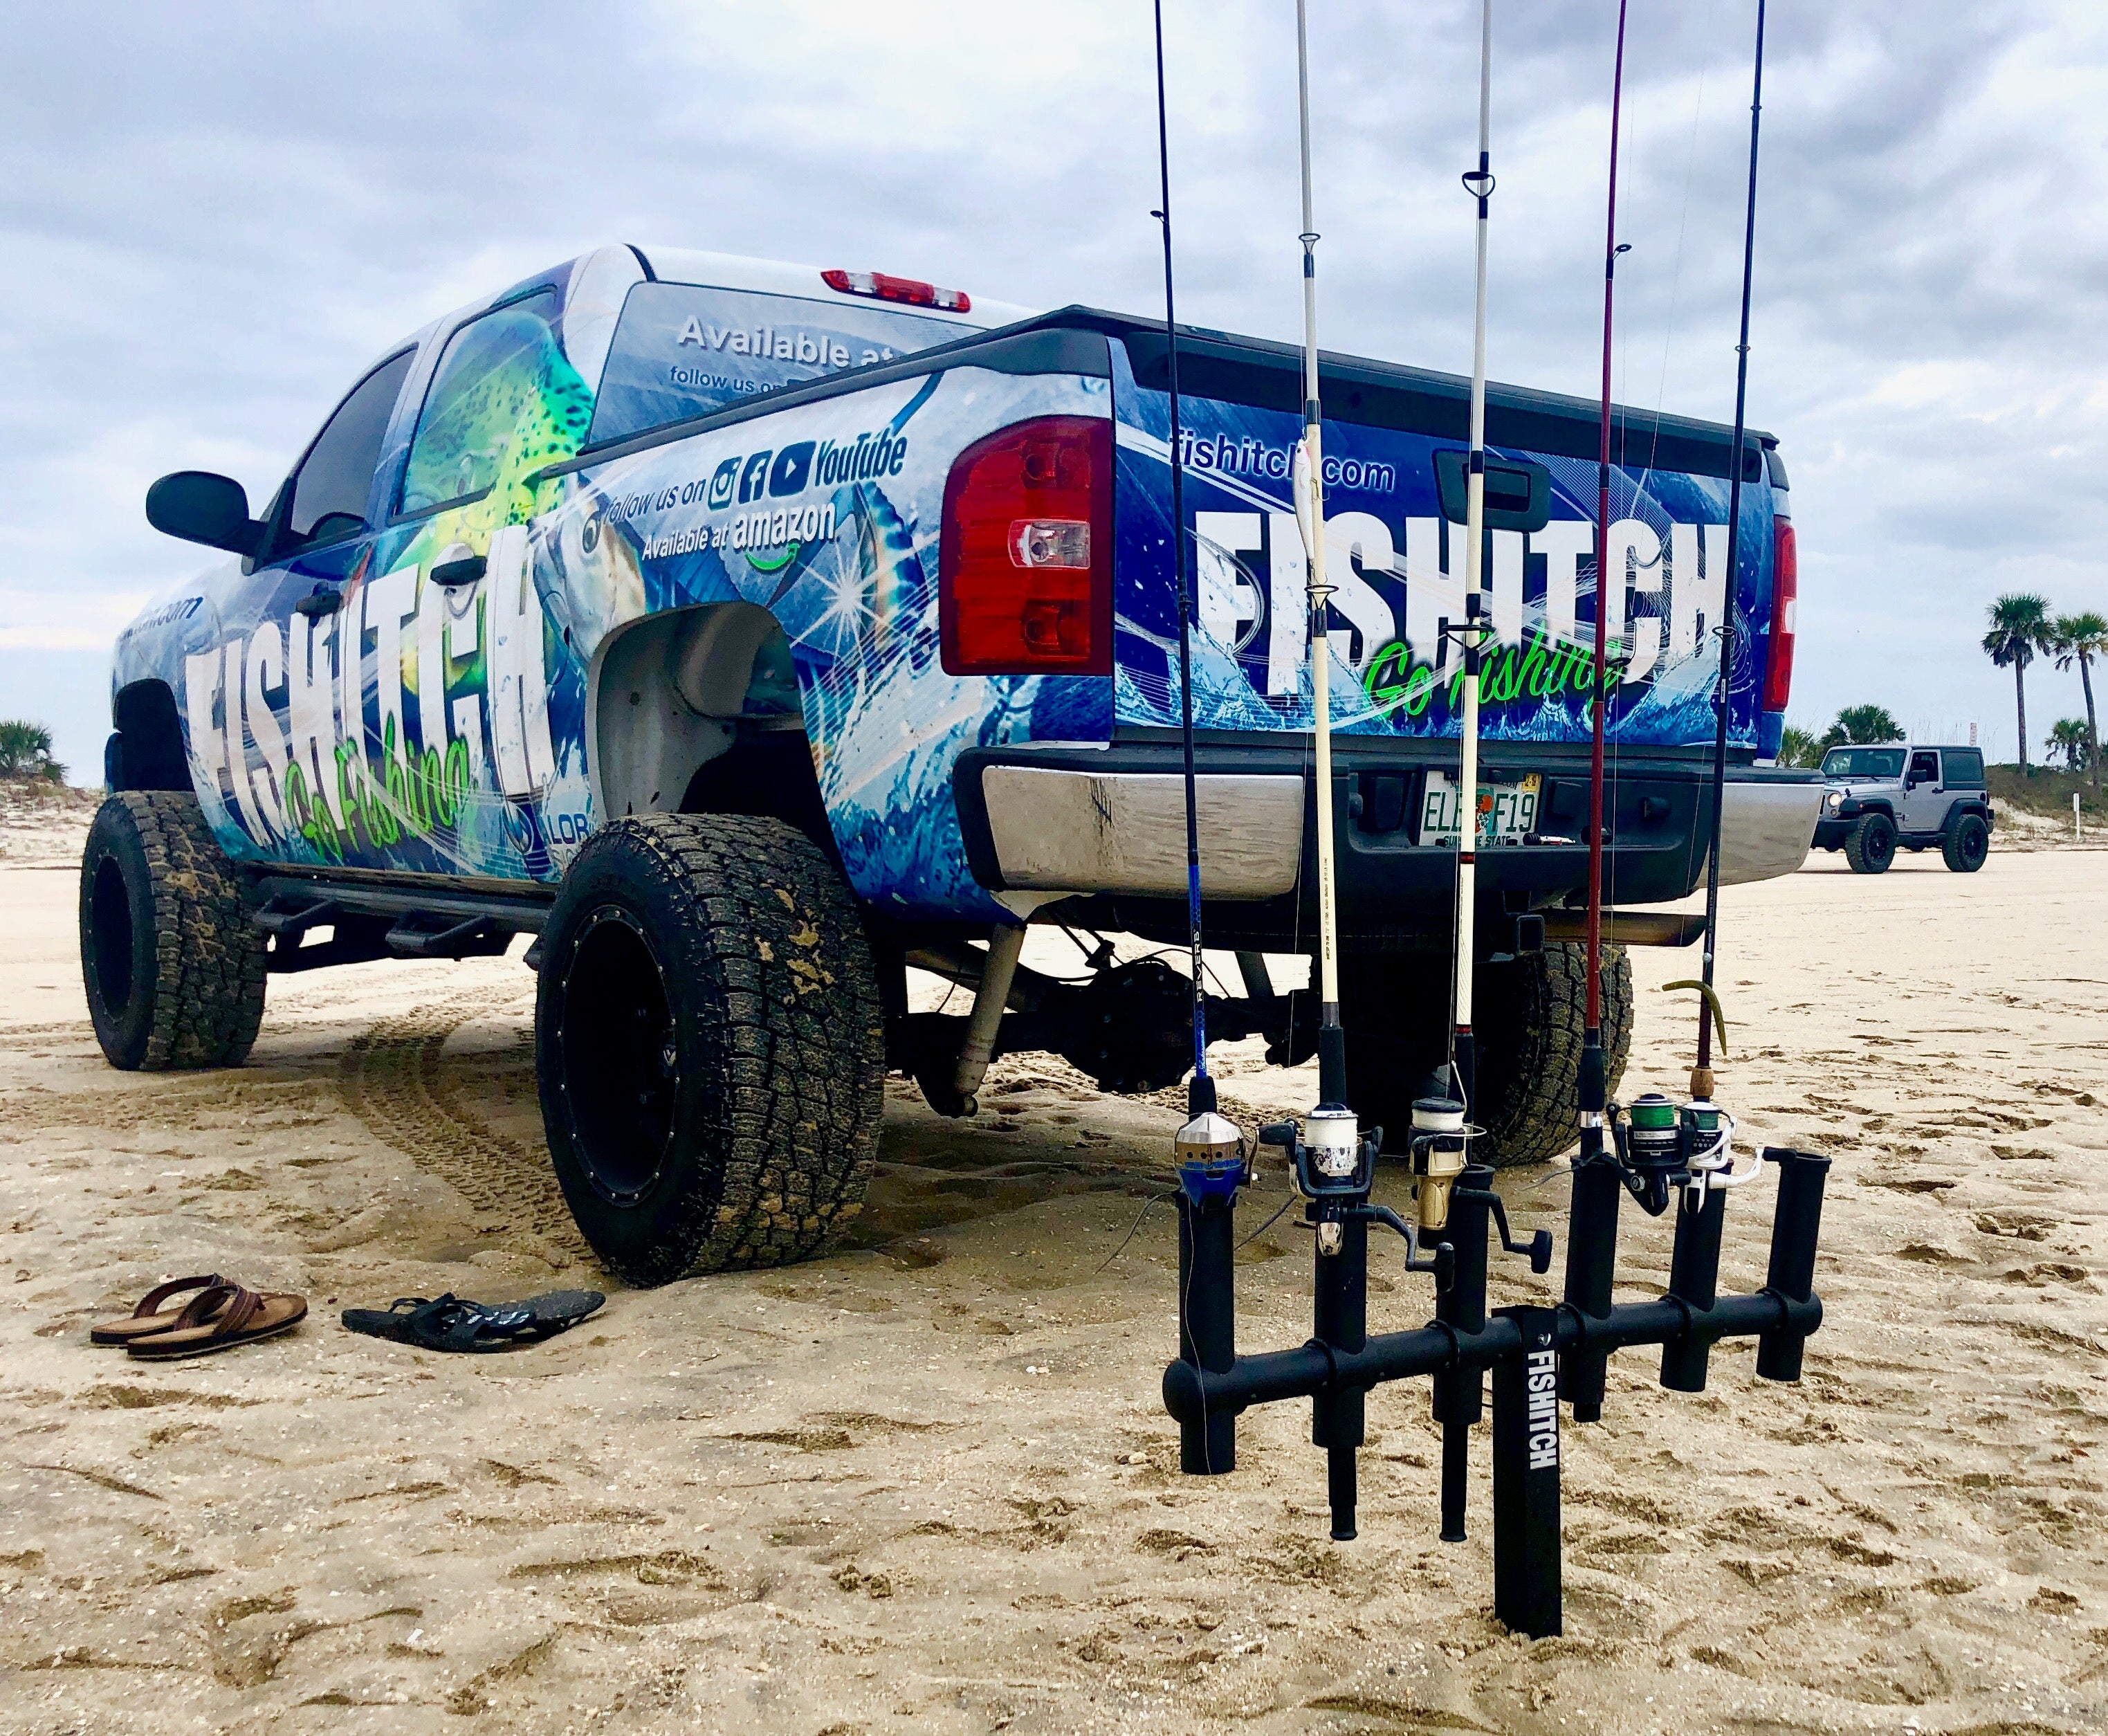 The 6 rod holder for trucks for FISHITCH is the perfect solution for your messy fishing trips!